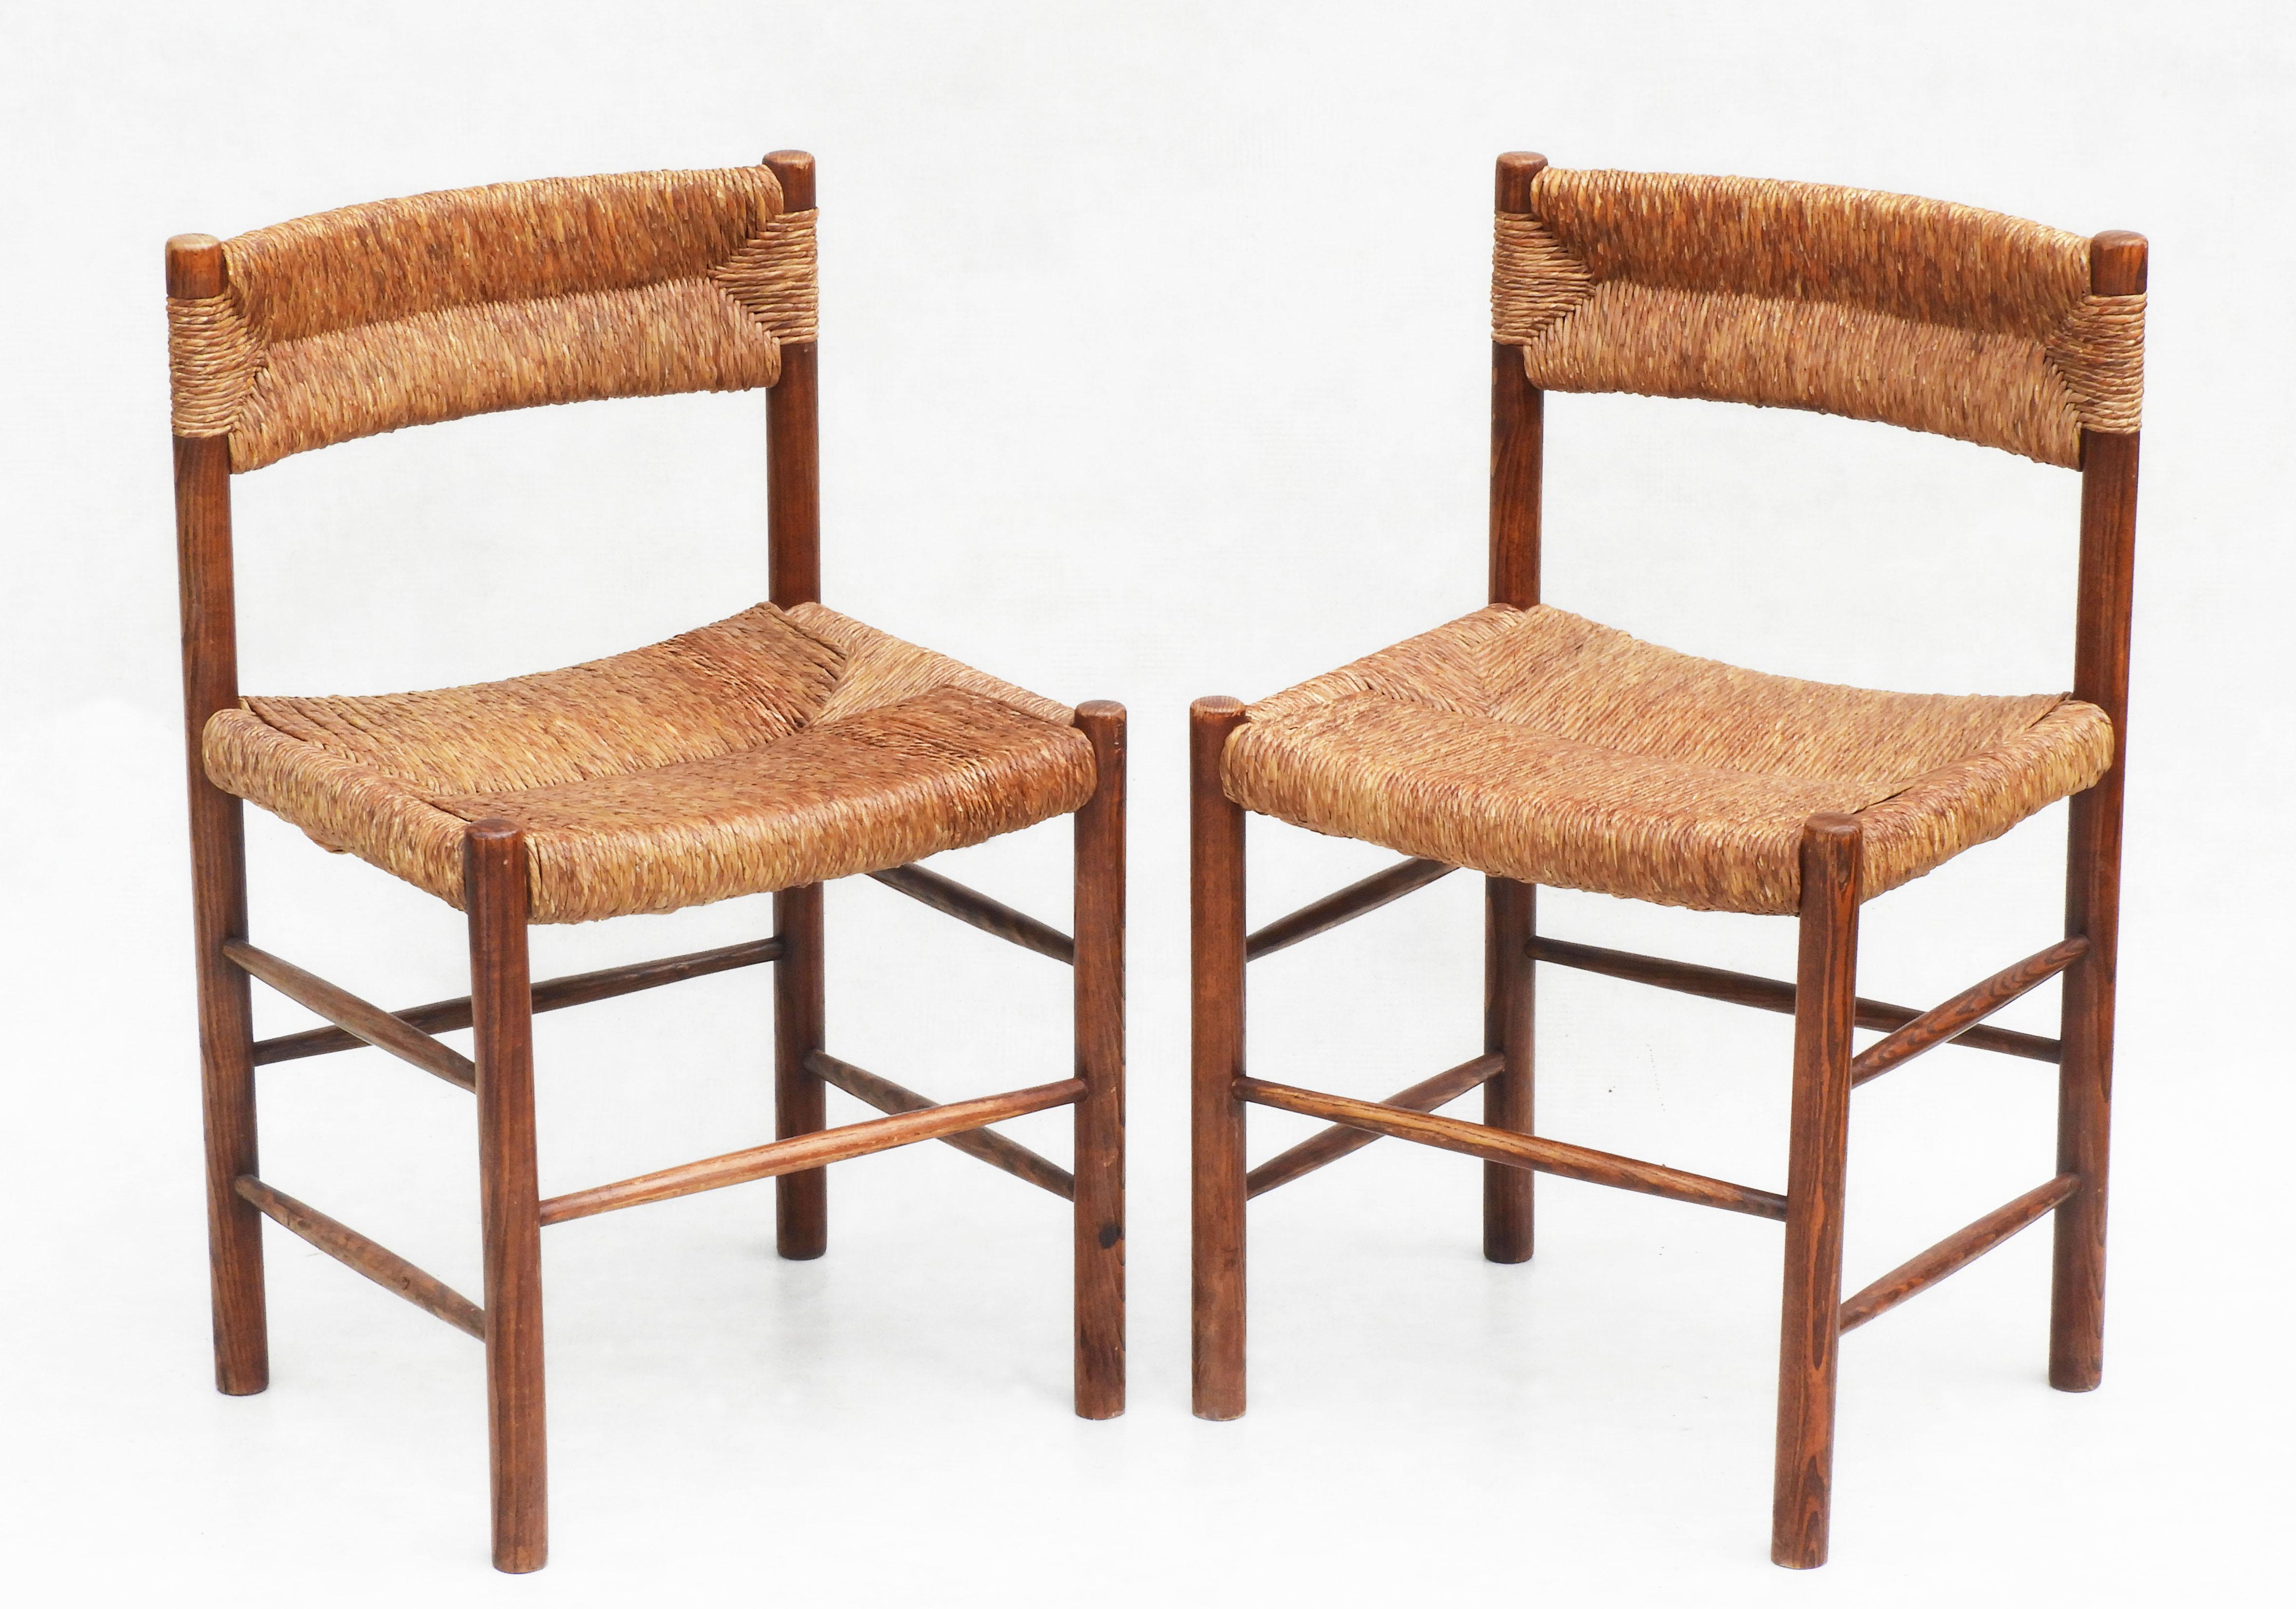 A good pair of Charlotte Perriande “Dordogne” dining chairs from French furniture maker Sentou c1960. 

Woven rush seat and backrest on a warm brown wooden frame. 

A stylish mid-century modern take on a traditional rustic design. 

In good